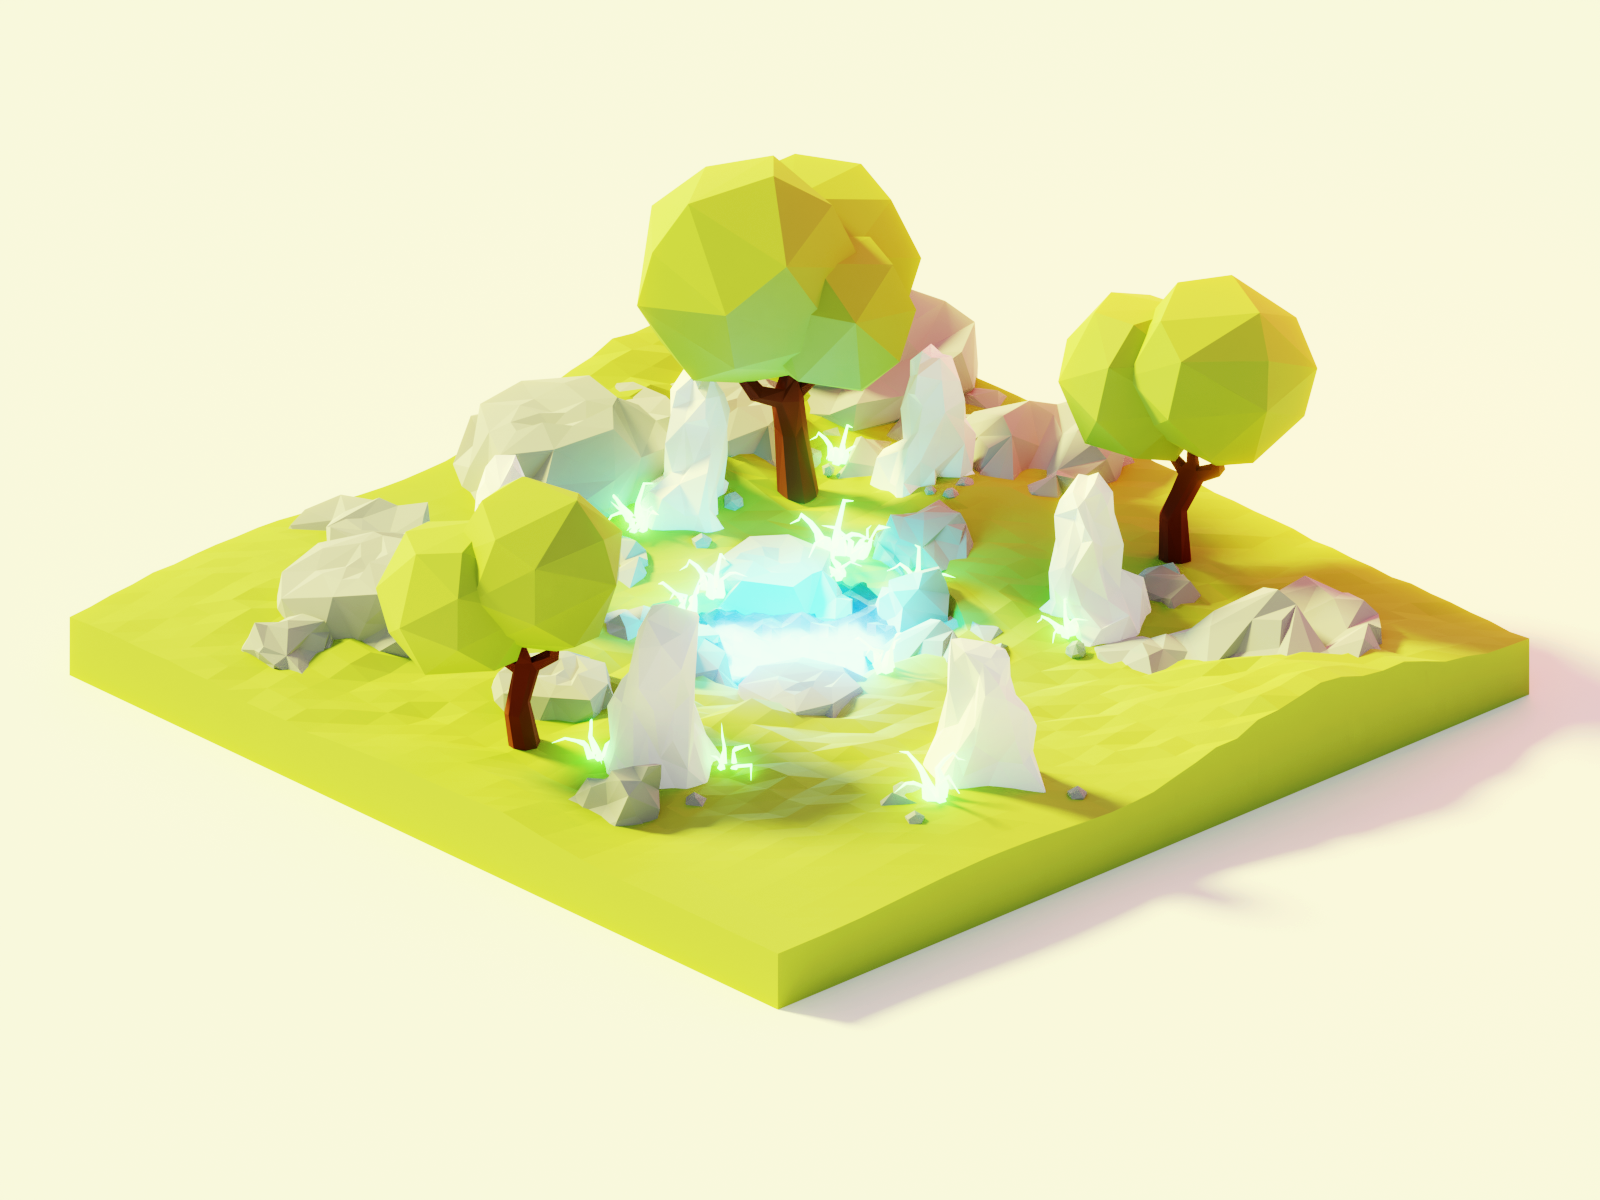 Fountain of Youth Pt. 2 3d blender design diorama fantasy illustration isometric low poly lowpoly lowpolyart model nature pond render